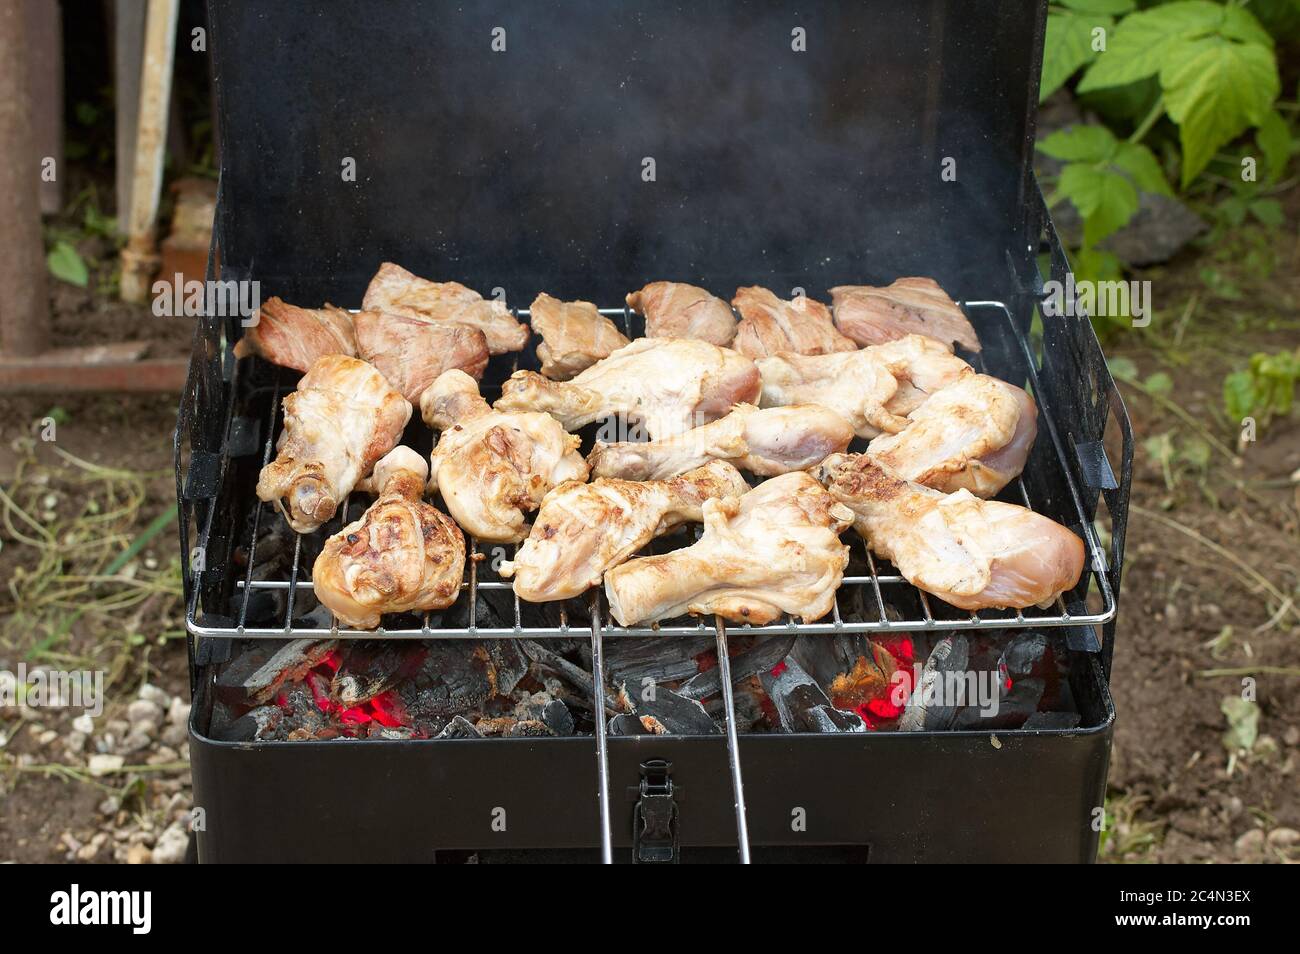 BBQ Chicken Legs Roasted On The Hot Flaming Charcoal Grill, Top View Close Up Stock Photo